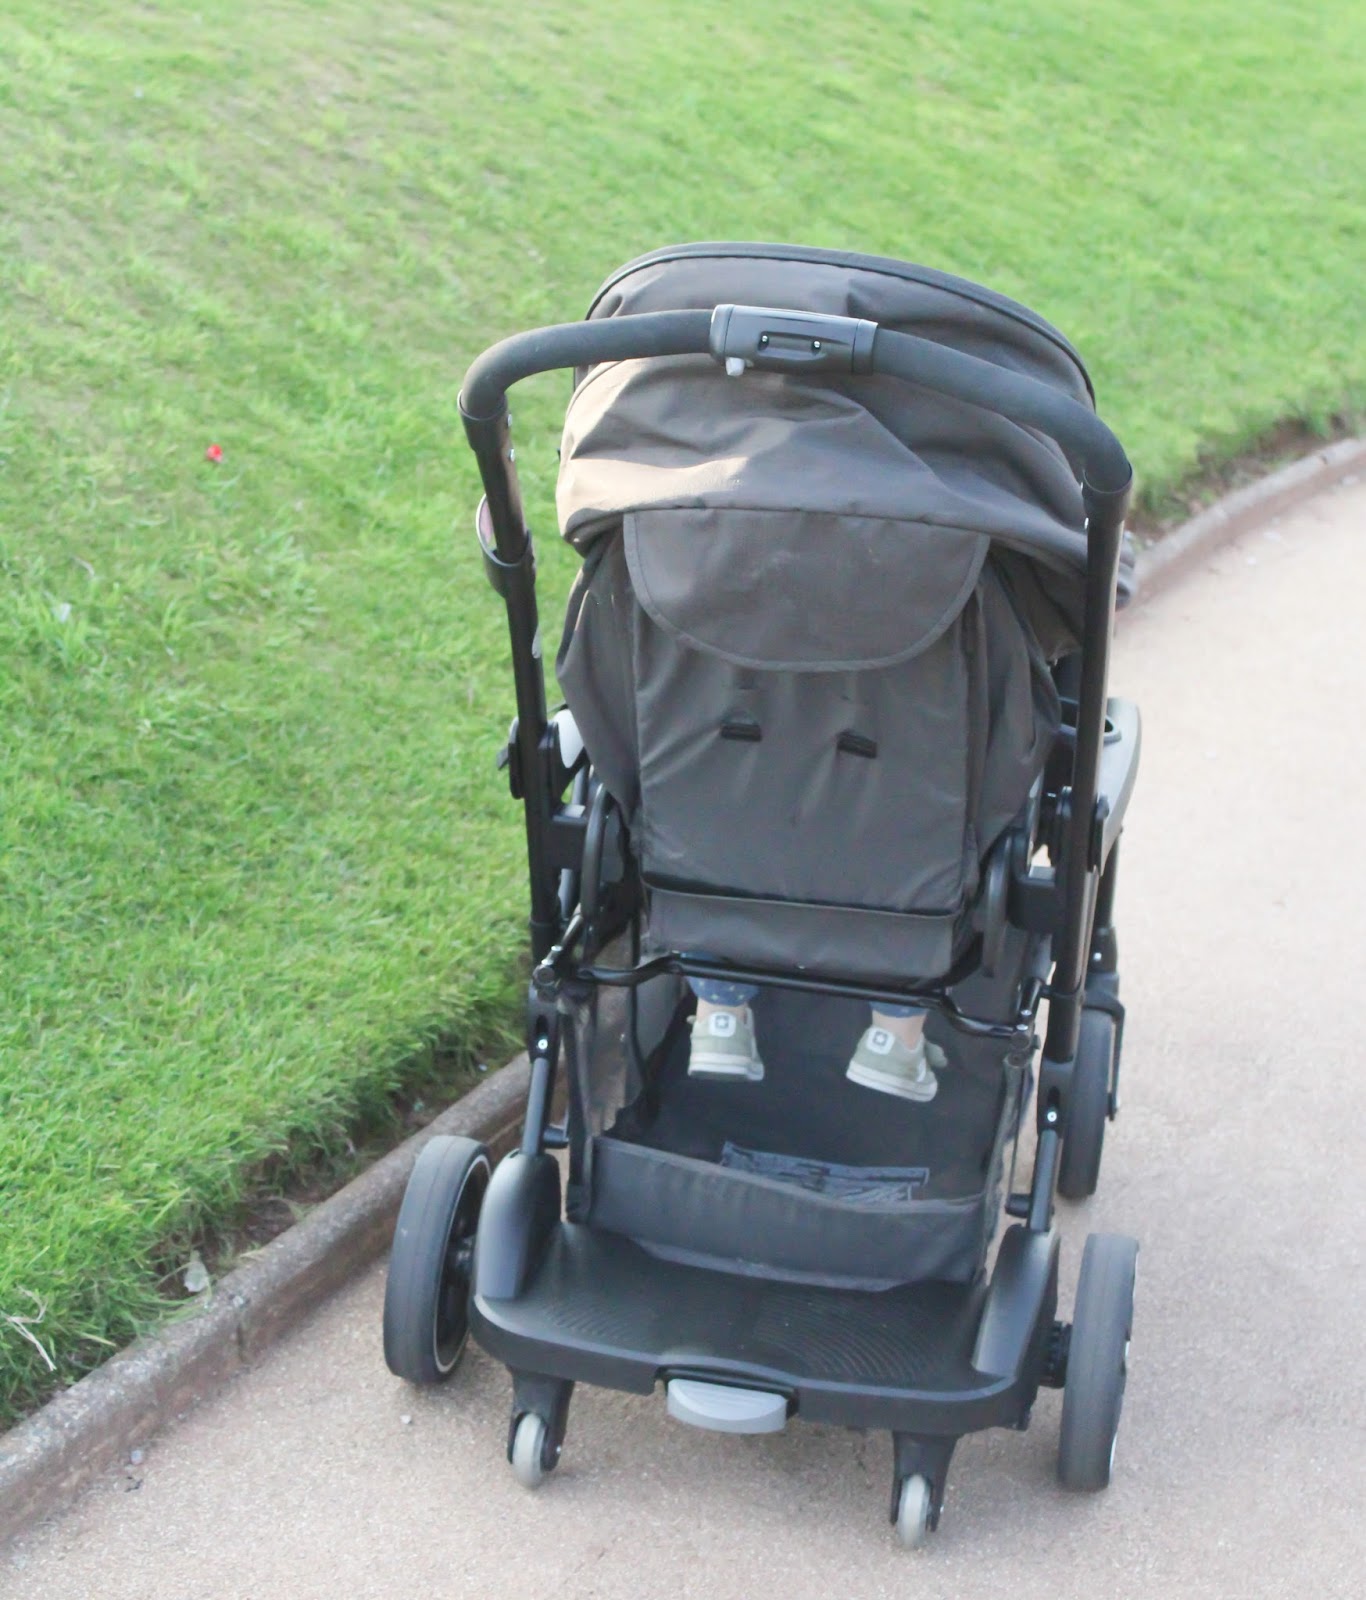 modes duo stroller review